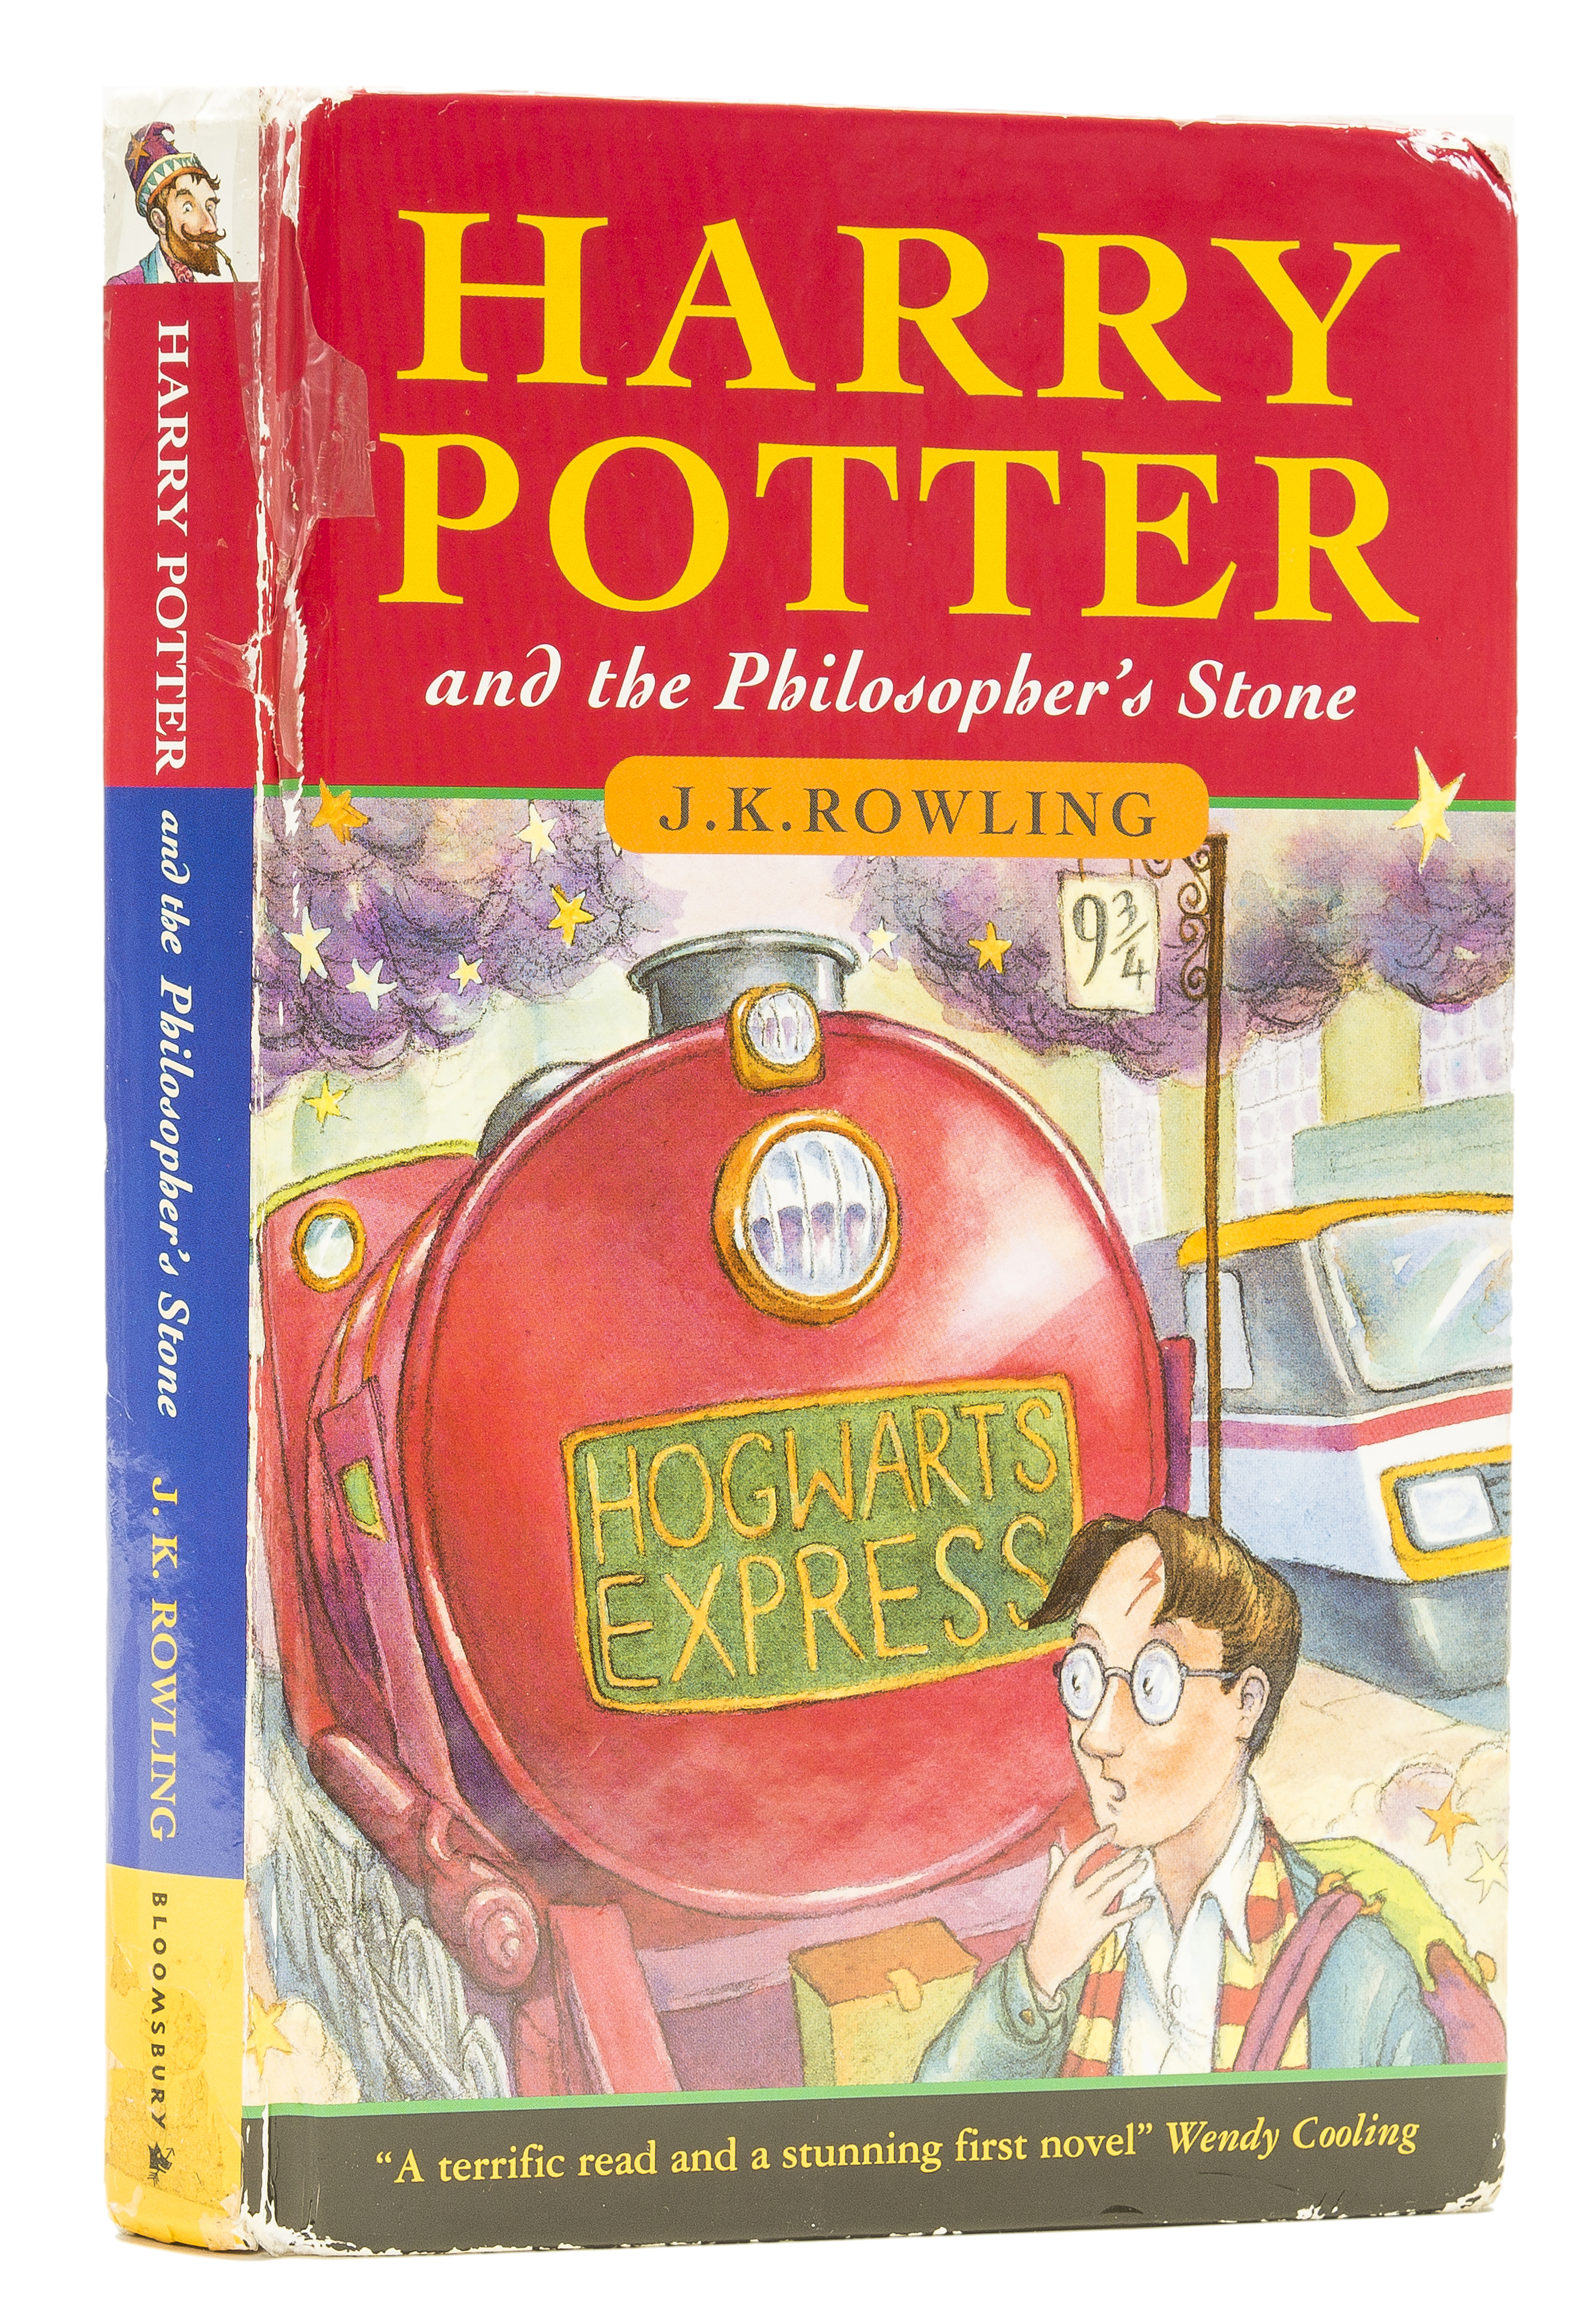 A first edition Harry Potter book is predicted to sell for thousands of pounds at auction